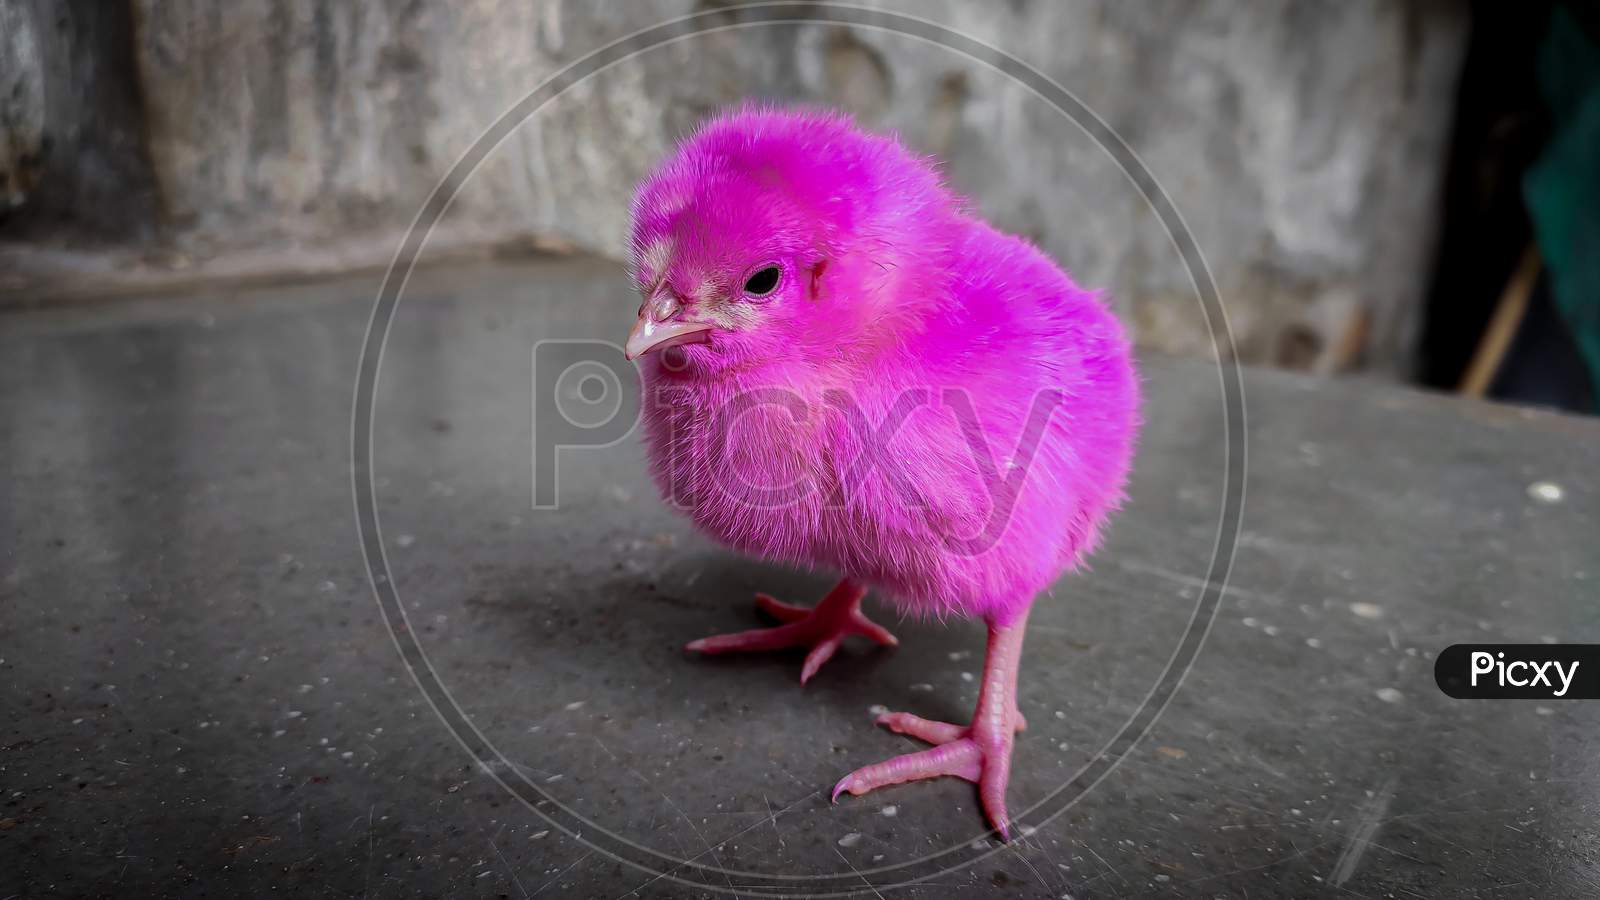 colour baby chicken images